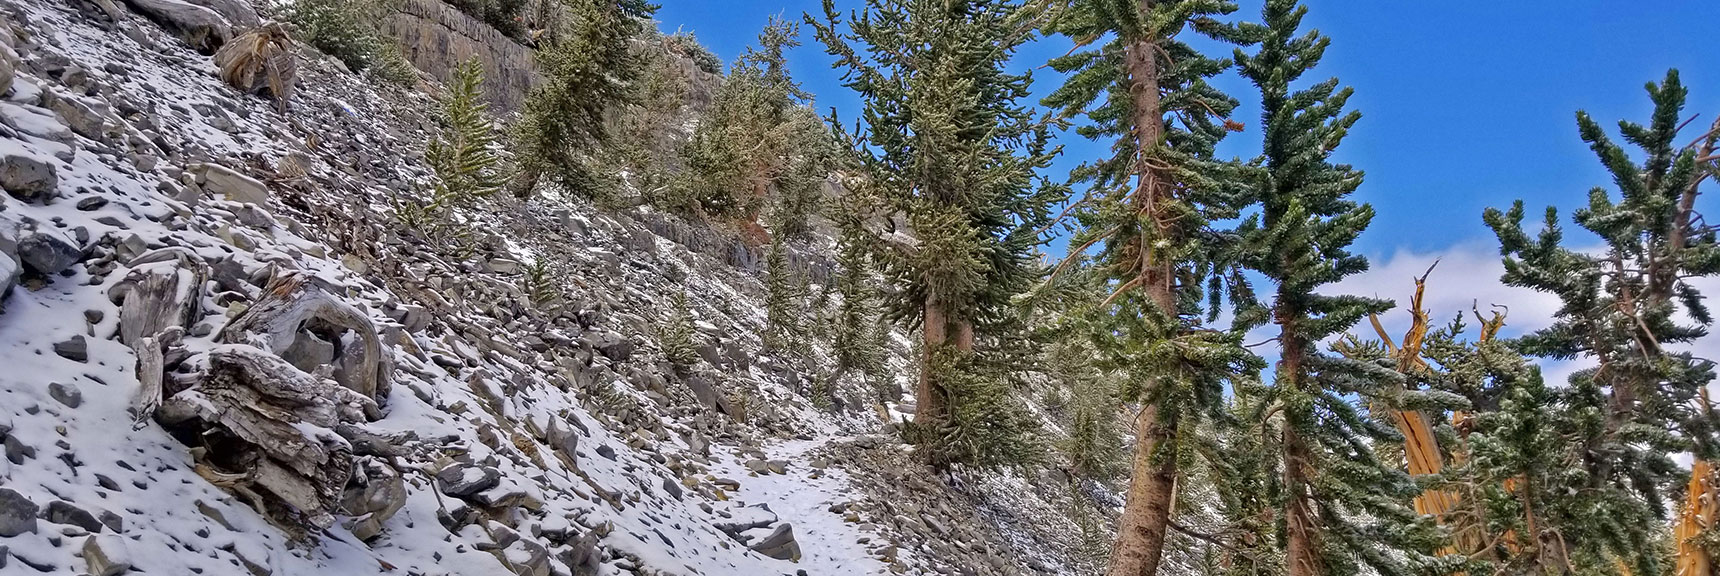 Stretch of Trail and Forest Just Passed | Charleston Peak Loop October Snow Dusting | Mt. Charleston Wilderness | Spring Mountains, Nevada